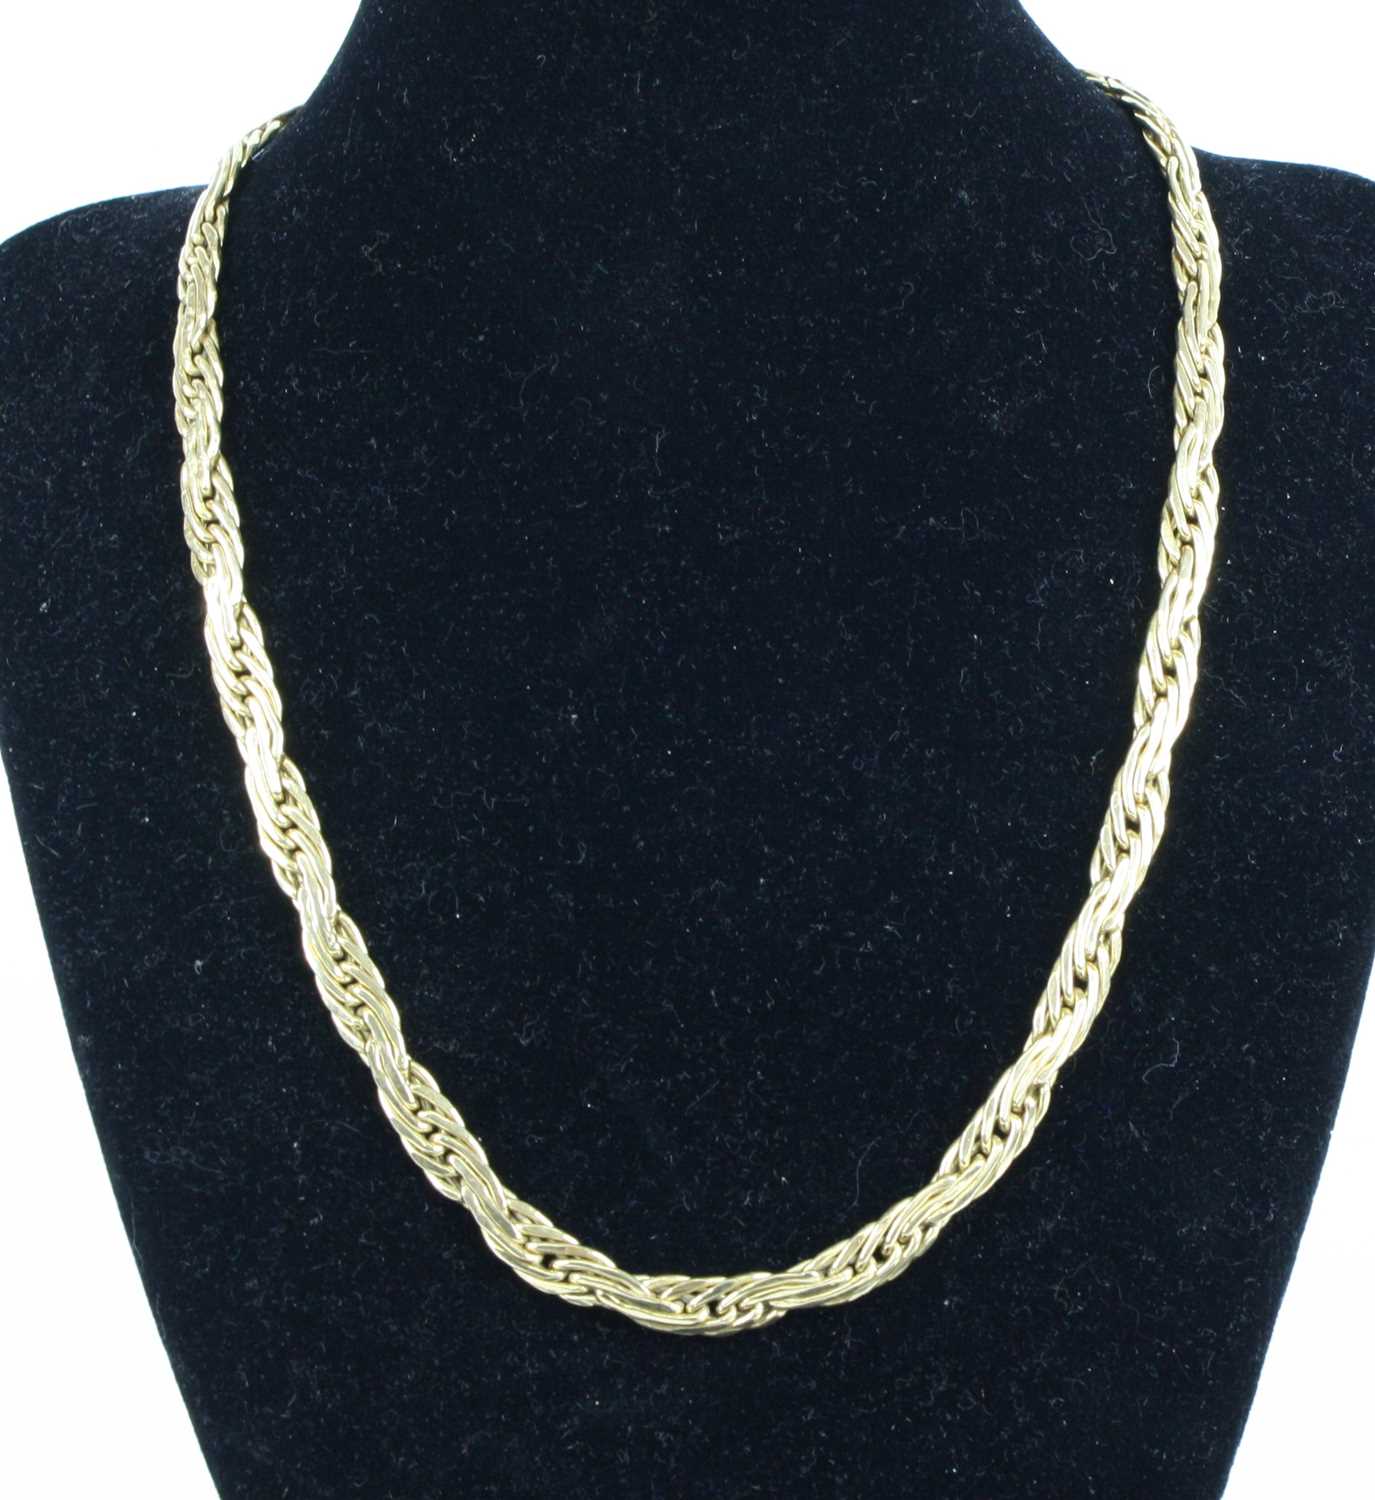 A 18ct yellow gold filed rope style neck chain, having lobster clasp, length 460mm, wi.6.45mm, gross